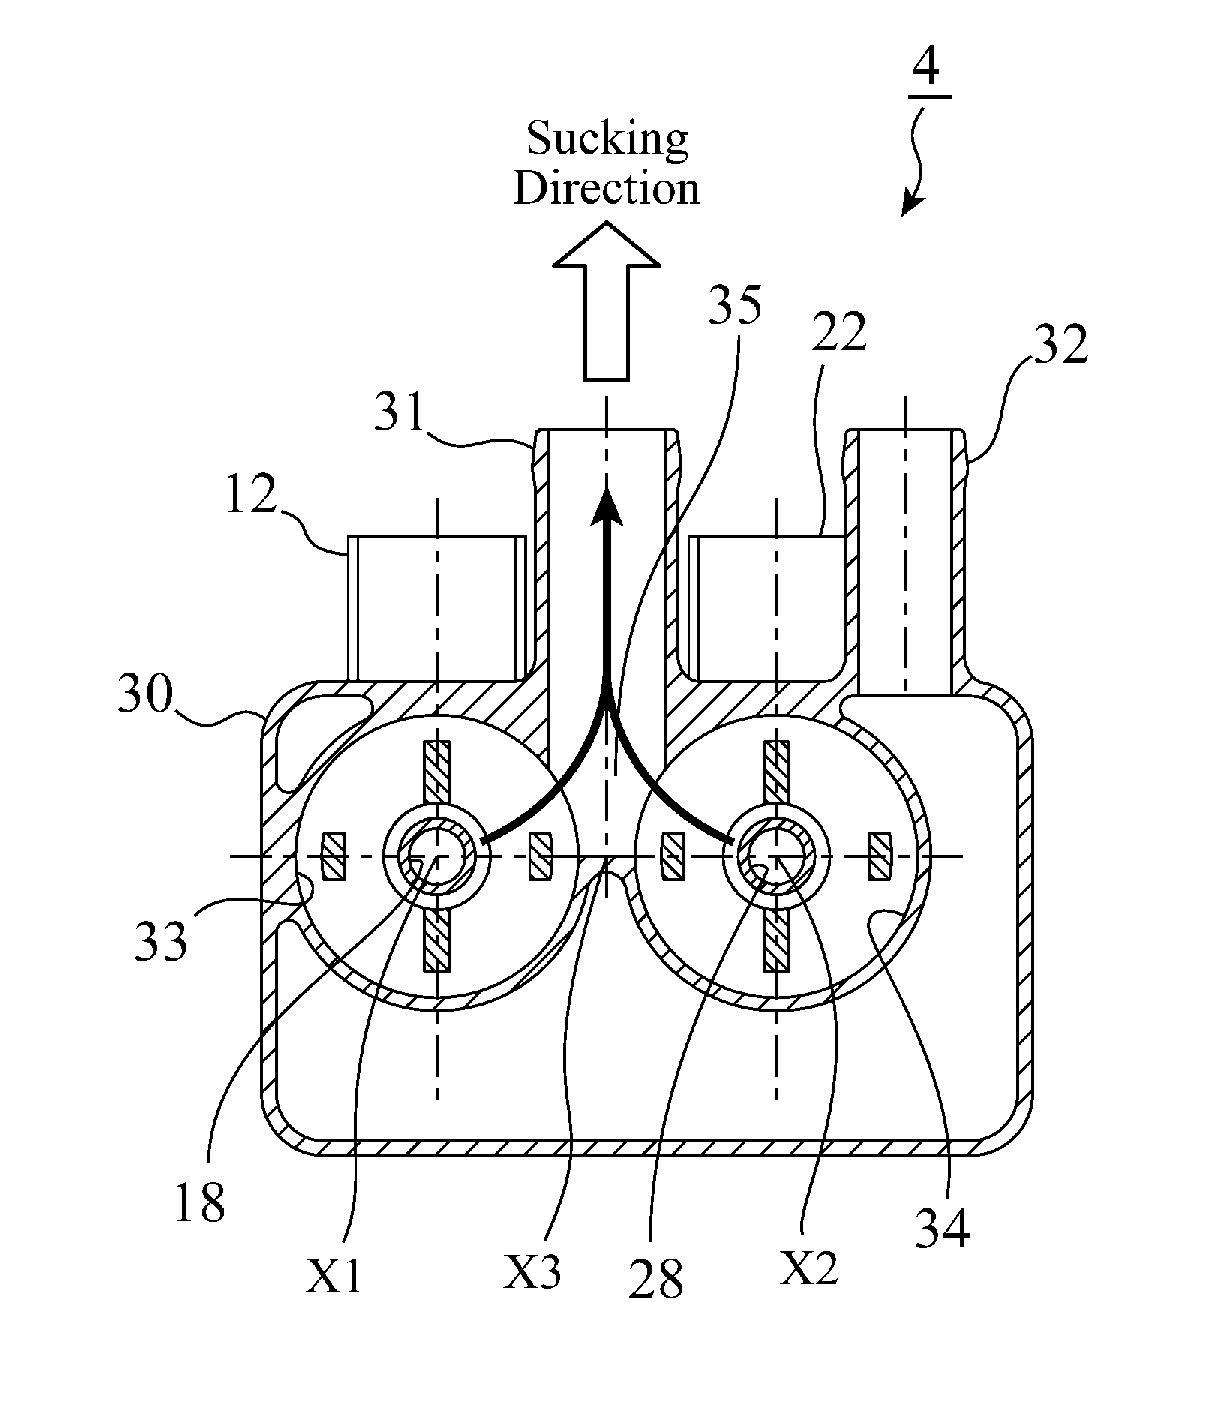 Dual electromagnetic valve and evaporated gas treatment system